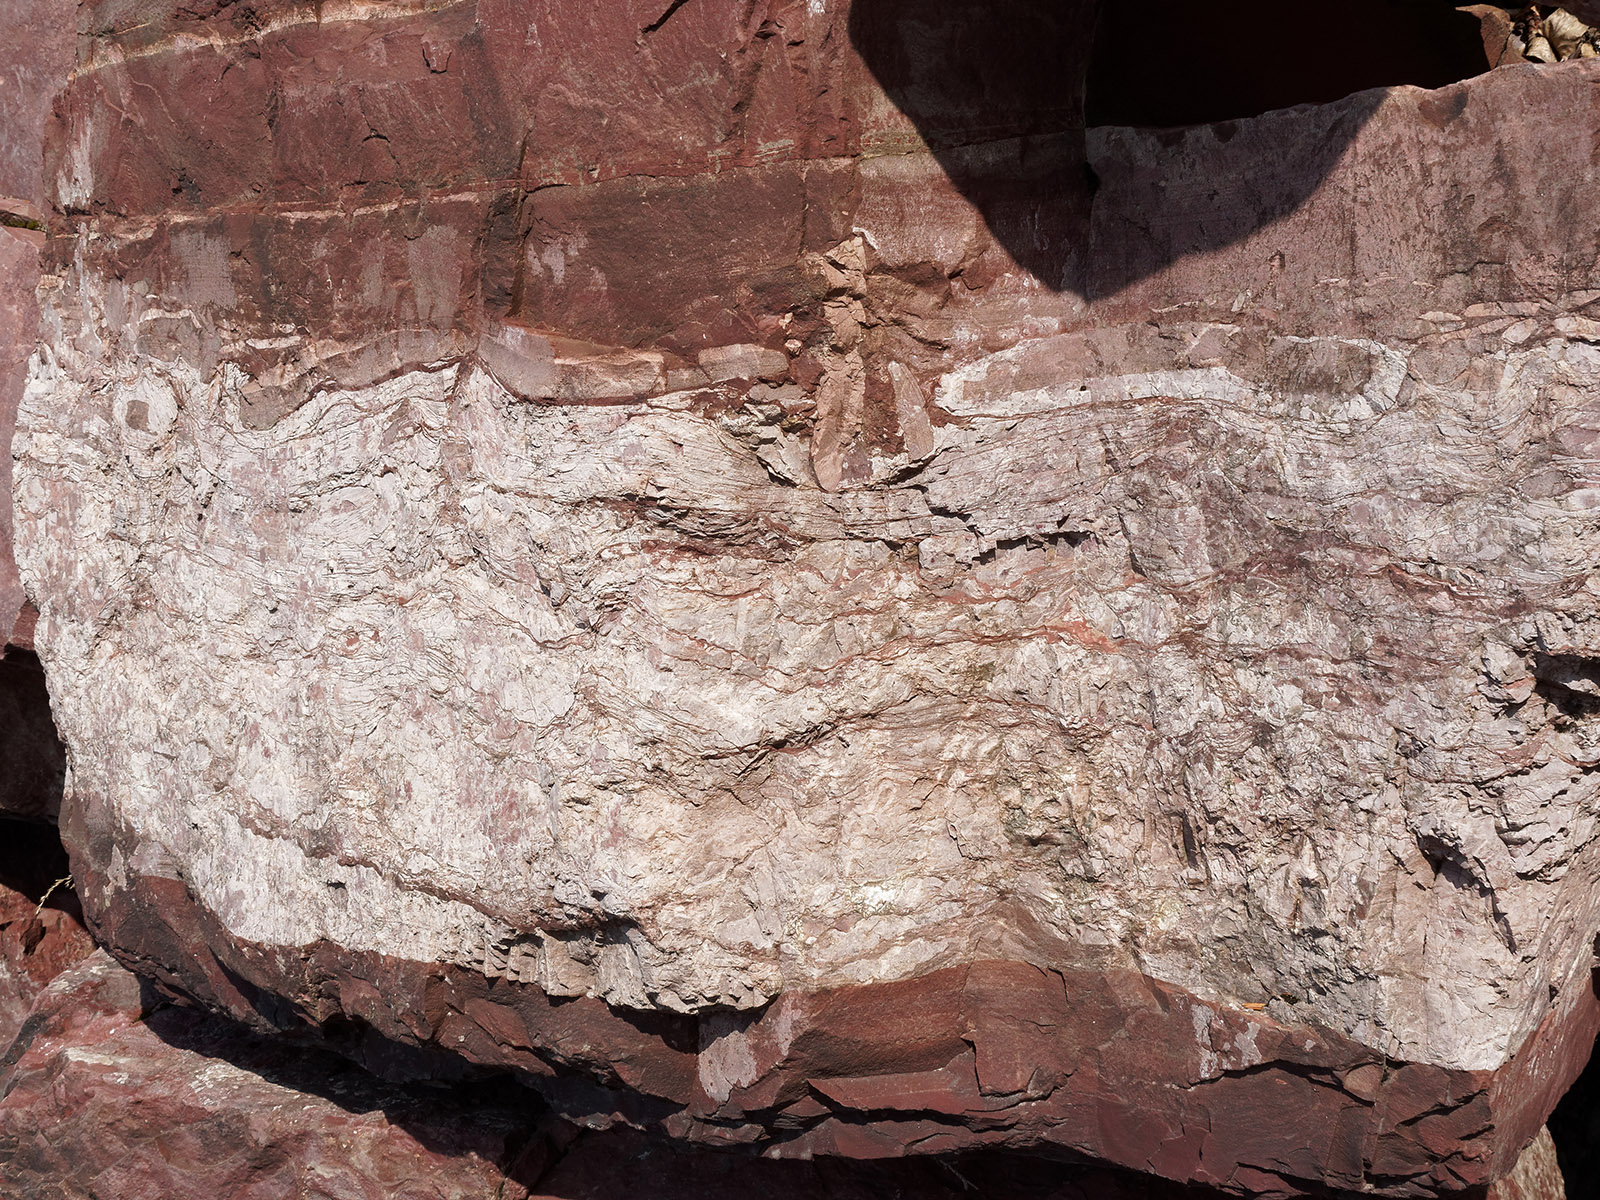 Grinnell formation:  Large white bands of quartzite.